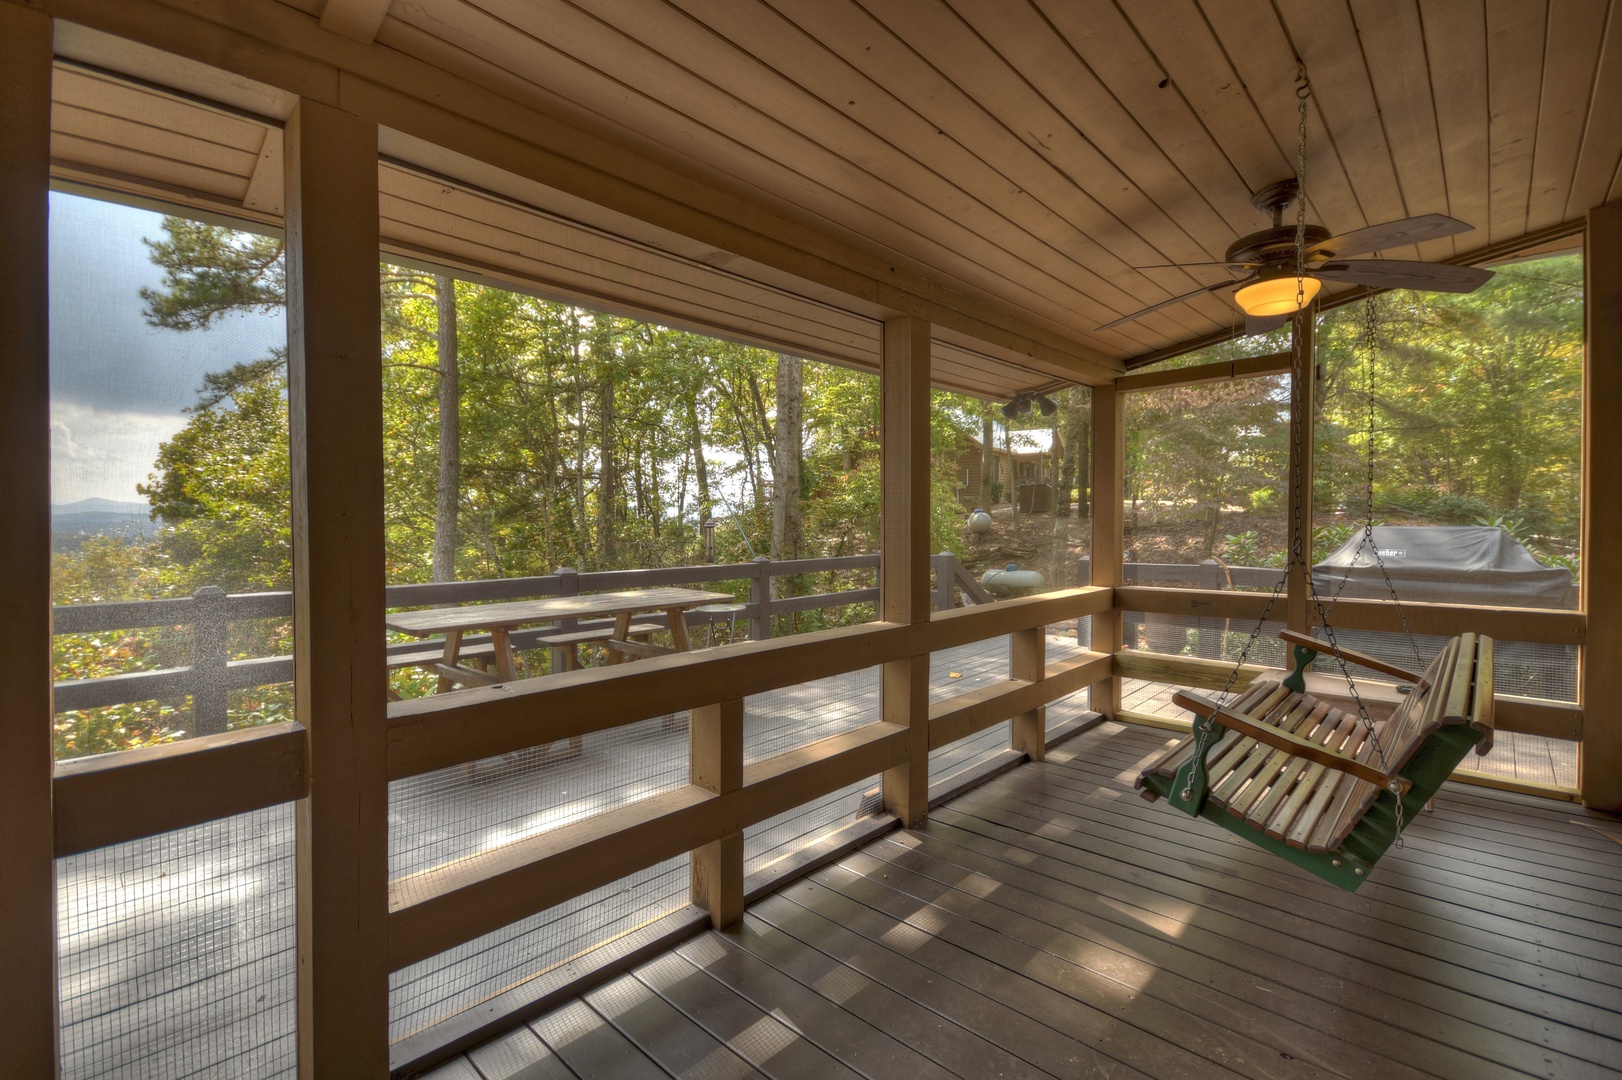 Peaceful, Easy Feeling - Entry Level Screened In Deck